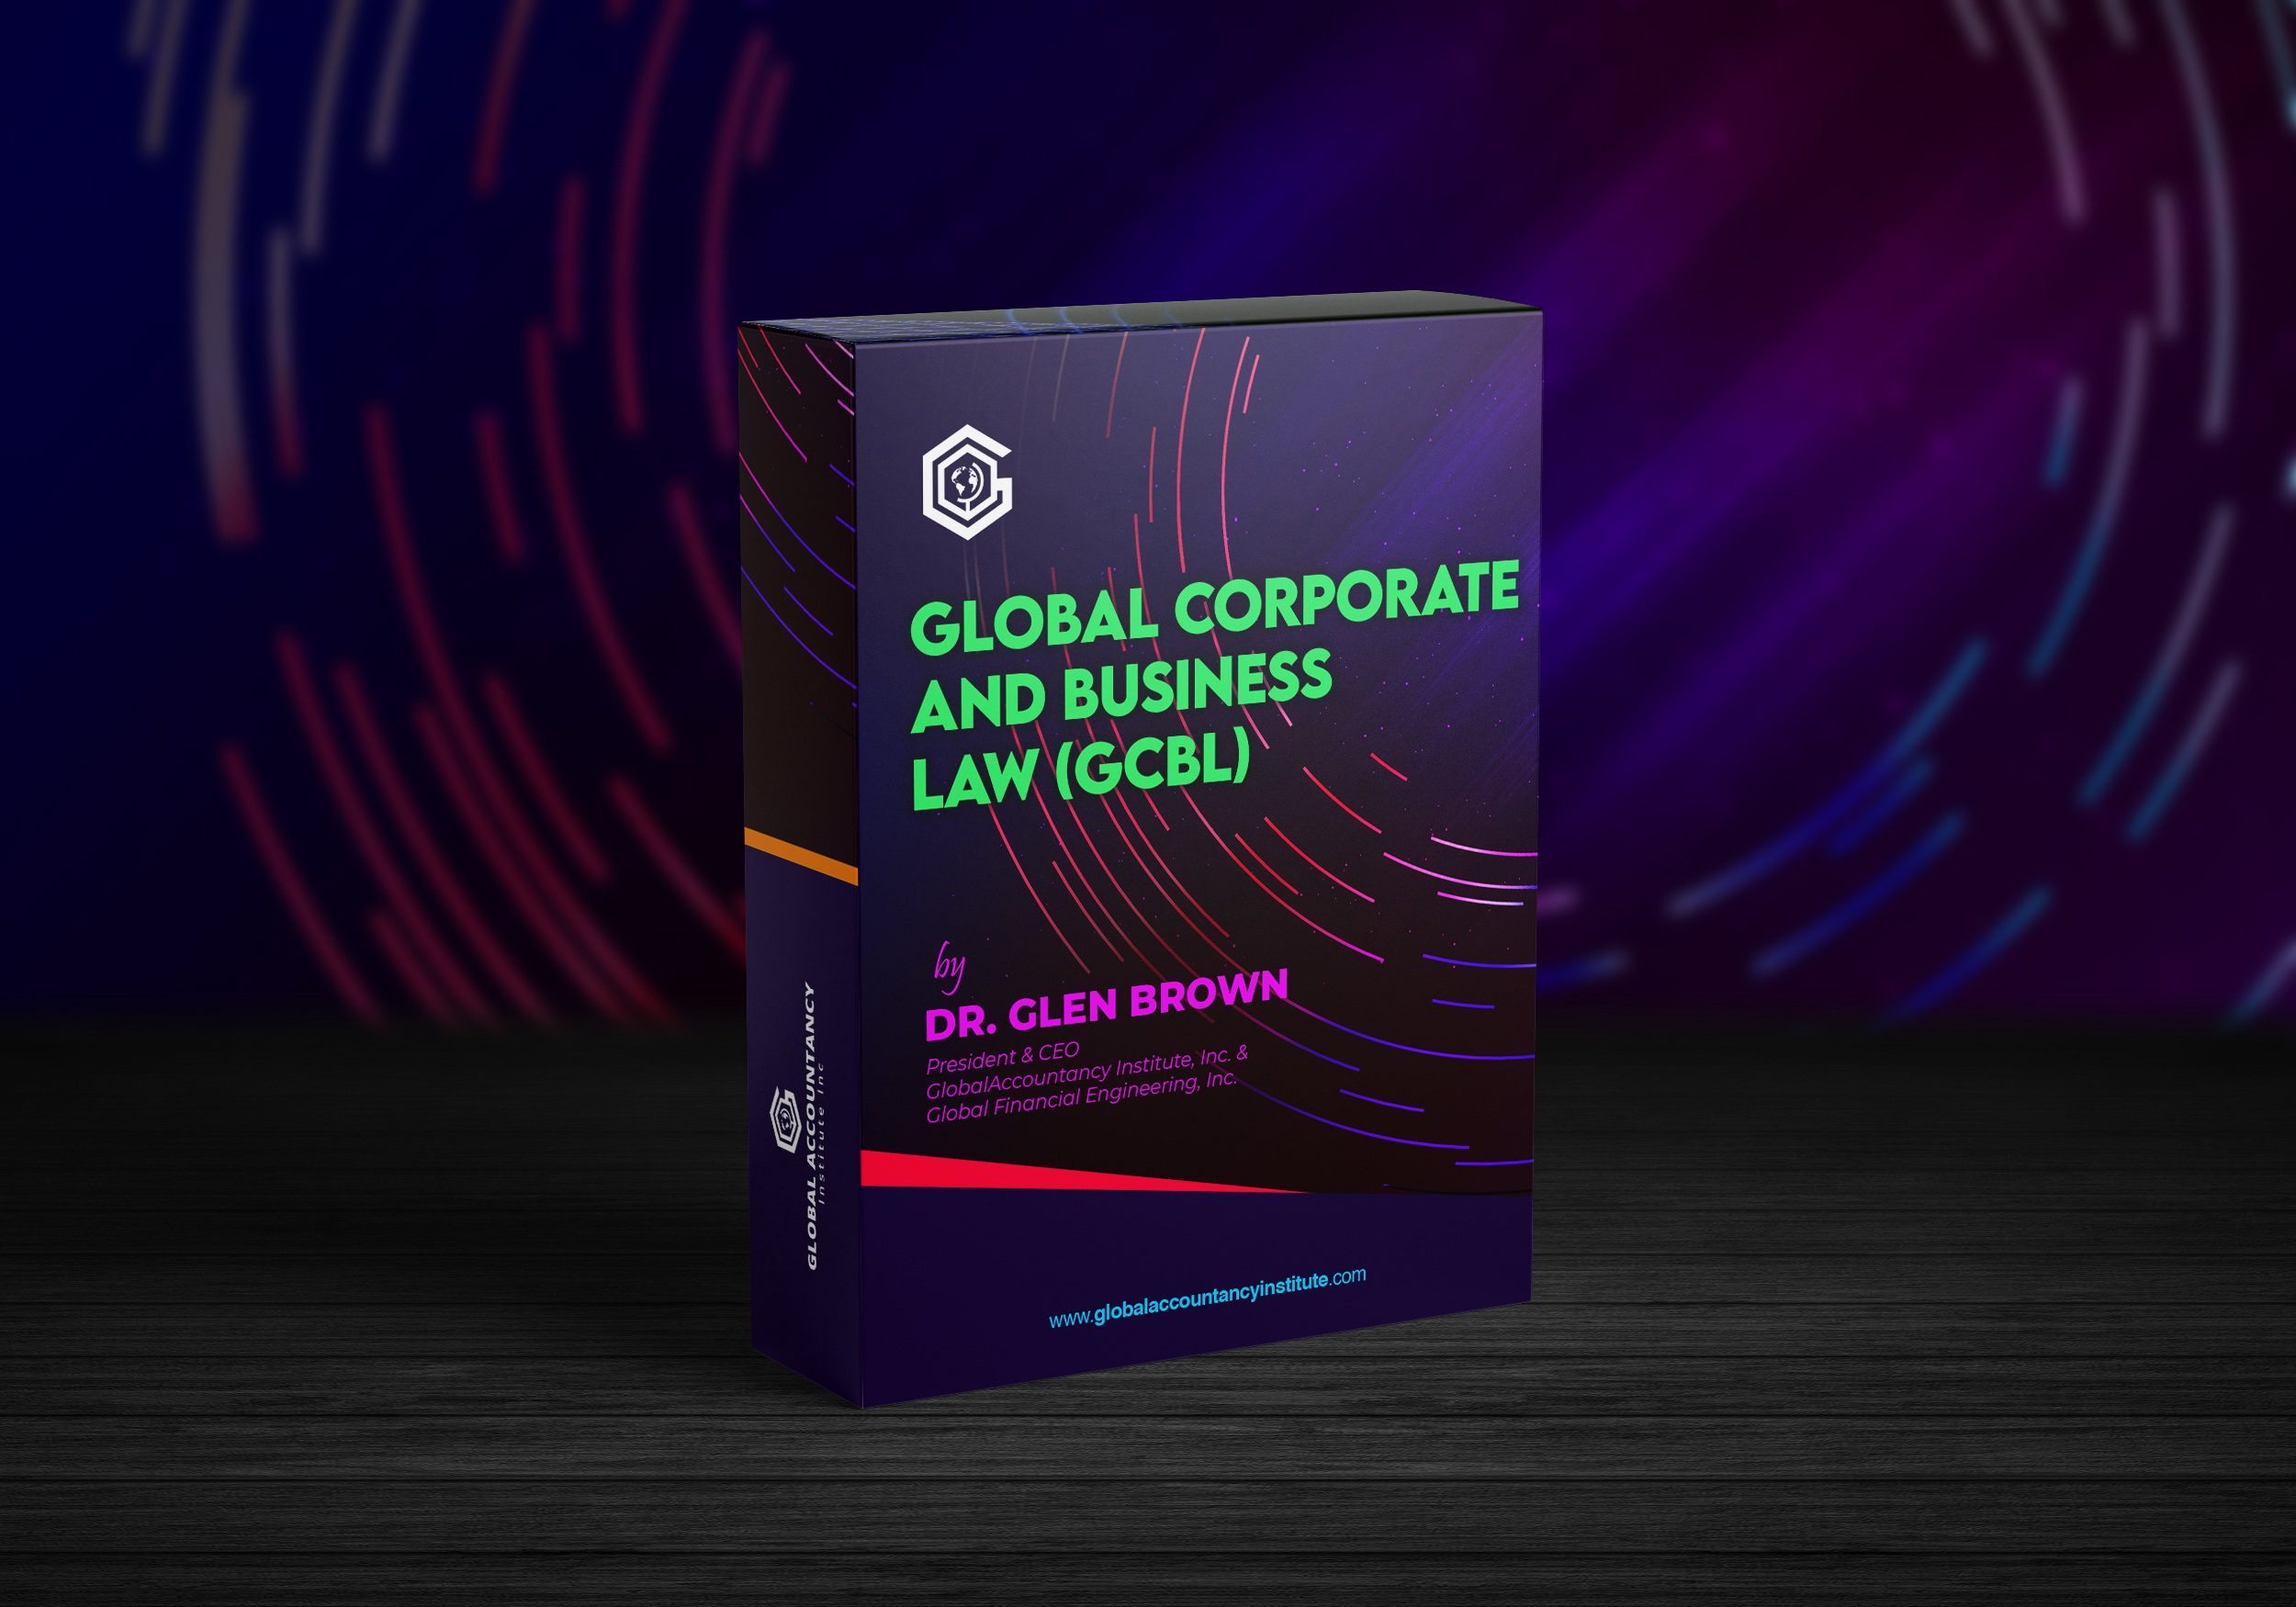 Global Corporate and Business Law(GCBL)